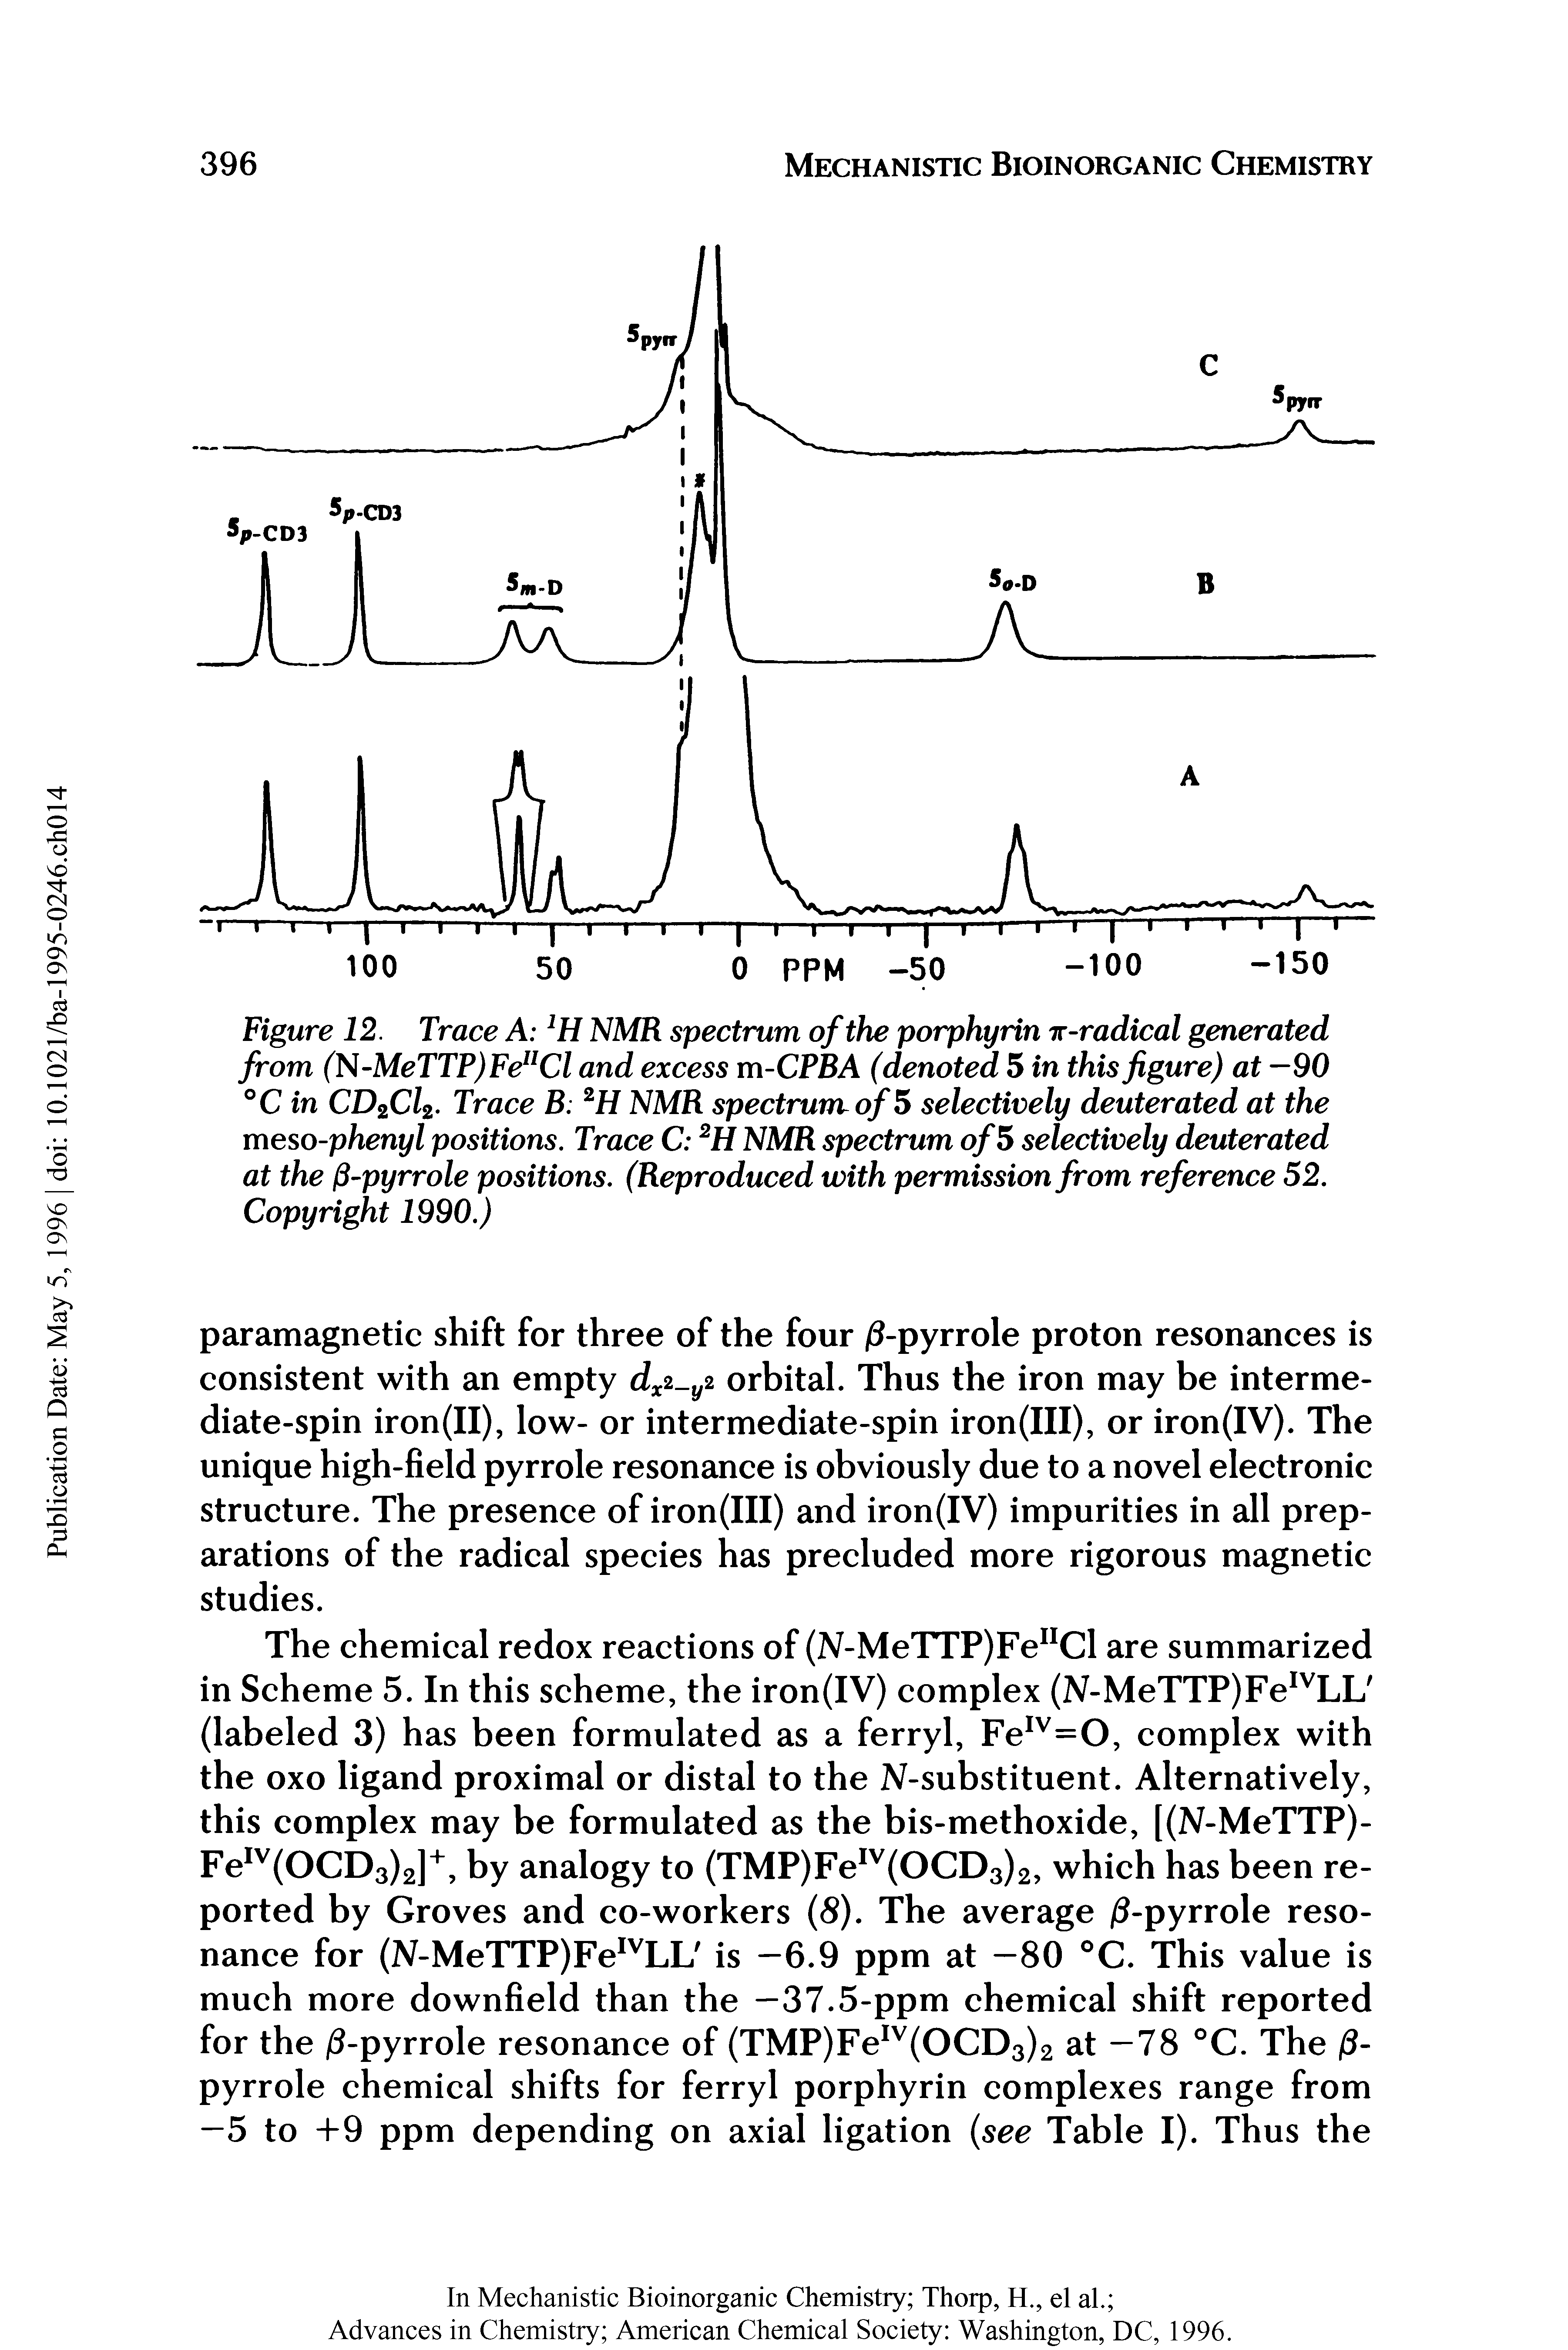 Figure 12. Trace A 1H NMR spectrum of the porphyrin x-radical generated from (N -MeTTP)FenCl and excess m-CPBA (denoted 5 in this figure) at —90 °C in CD2Cl2. Trace B 2H NMR spectrum of 5 selectively deuterated at the meso-phenyl positions. Trace C 2H NMR spectrum of 5 selectively deuterated at the /3-pyrrole positions. (Reproduced with permission from reference 52. Copyright 1990.)...